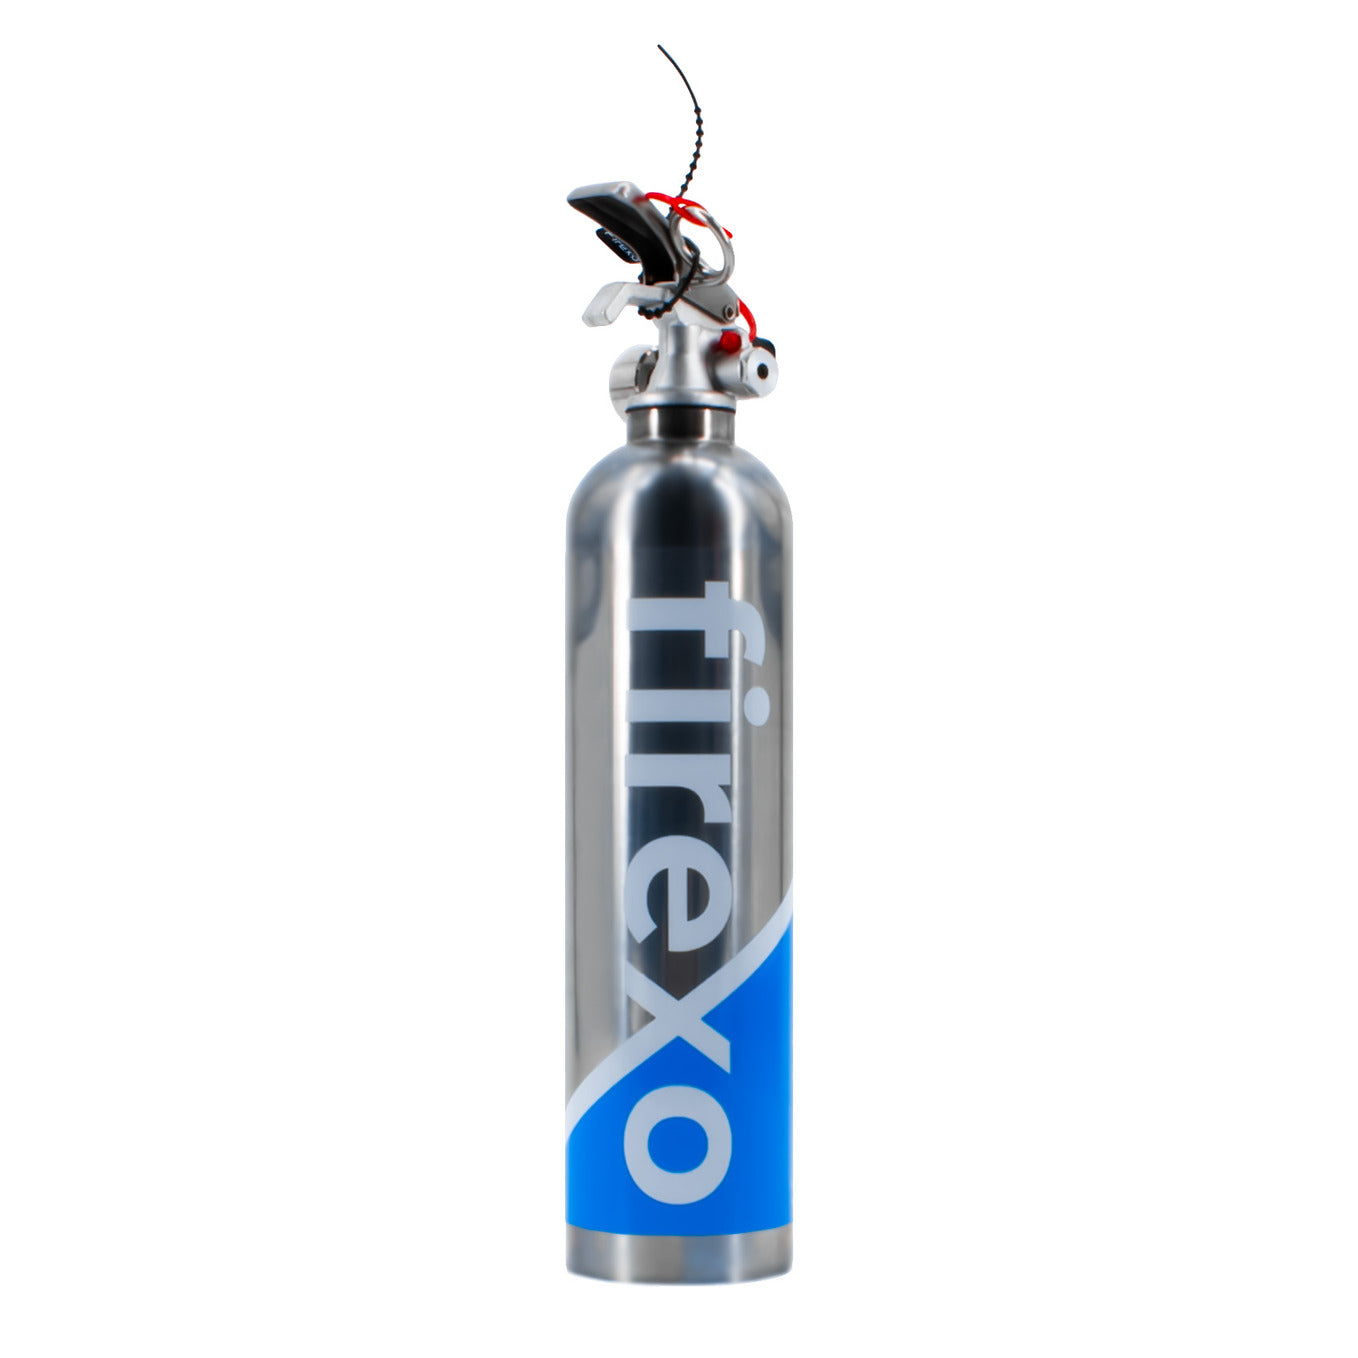 Firexo Landlord HMO ALL FIRES Fire Extinguisher Set